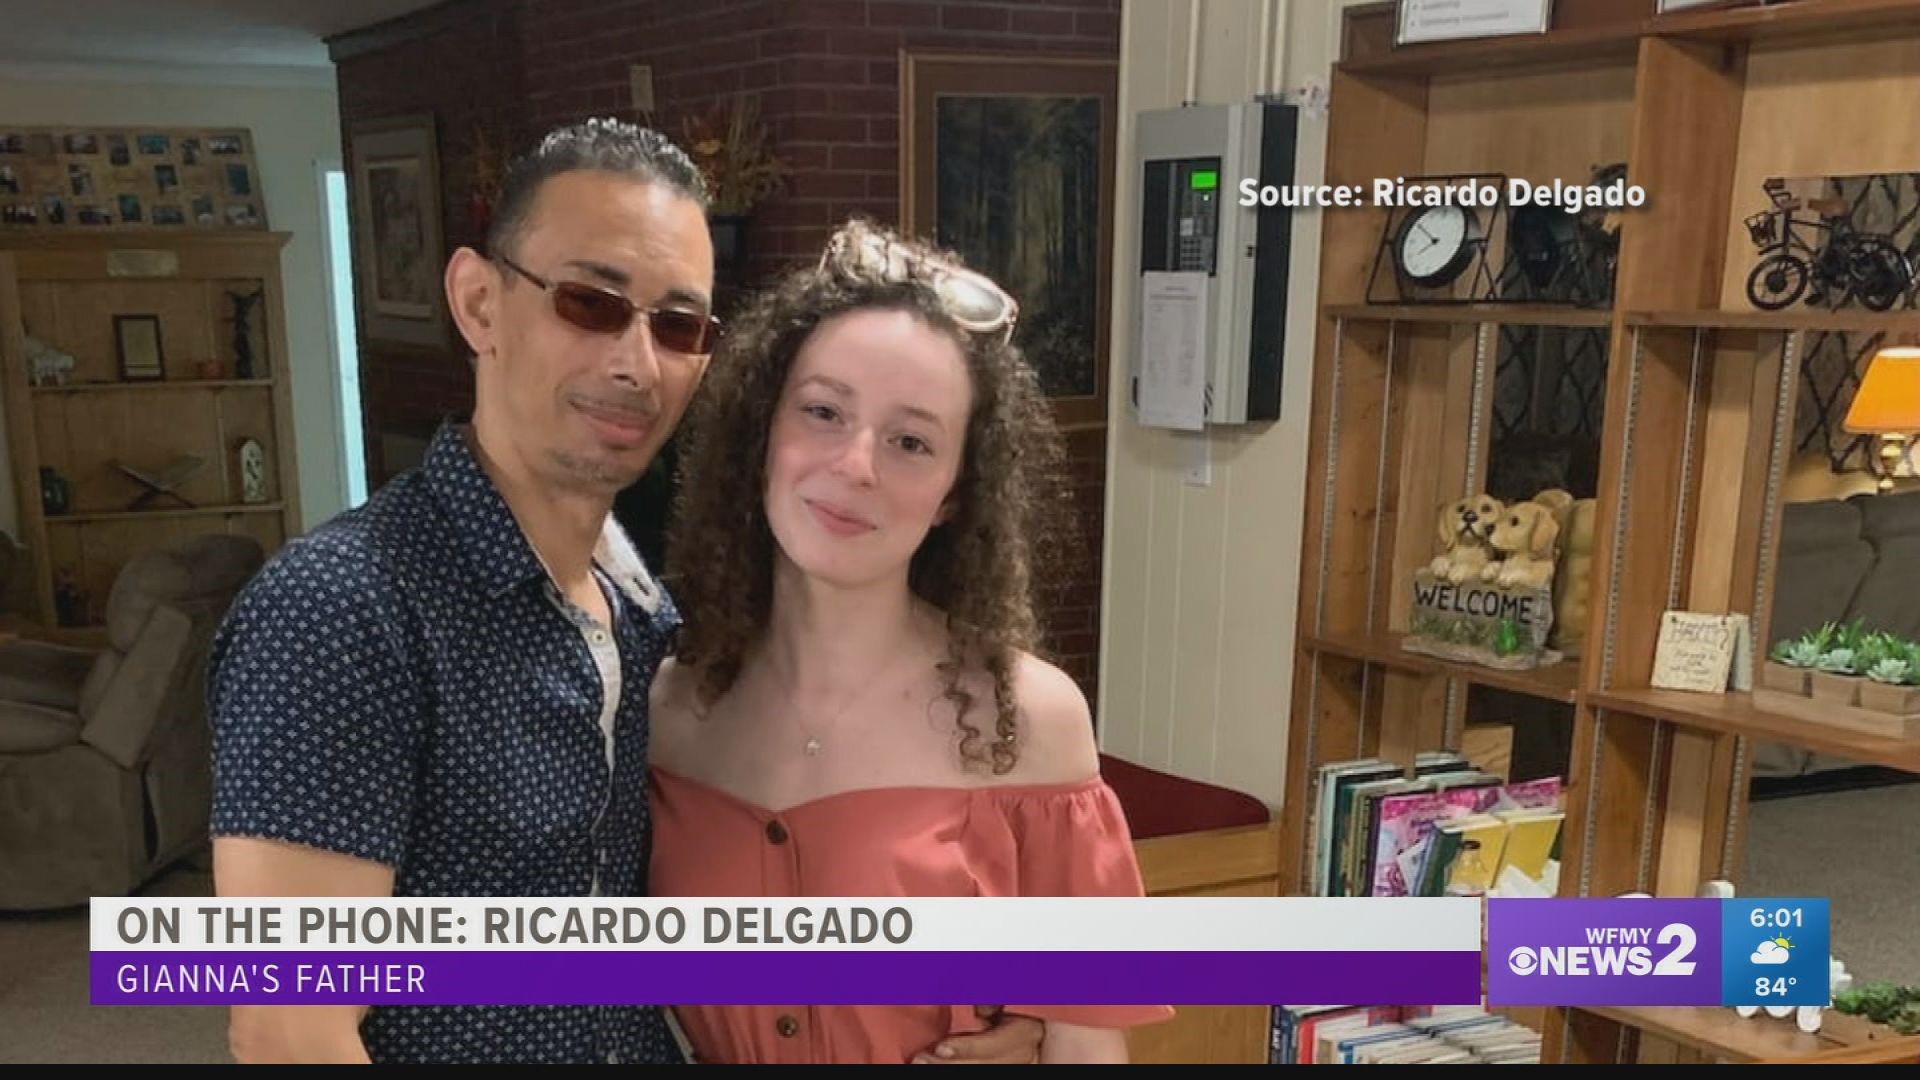 Ricardo Delgado's daughter, Gianna, was found dead in the trunk of a car in Tennessee.